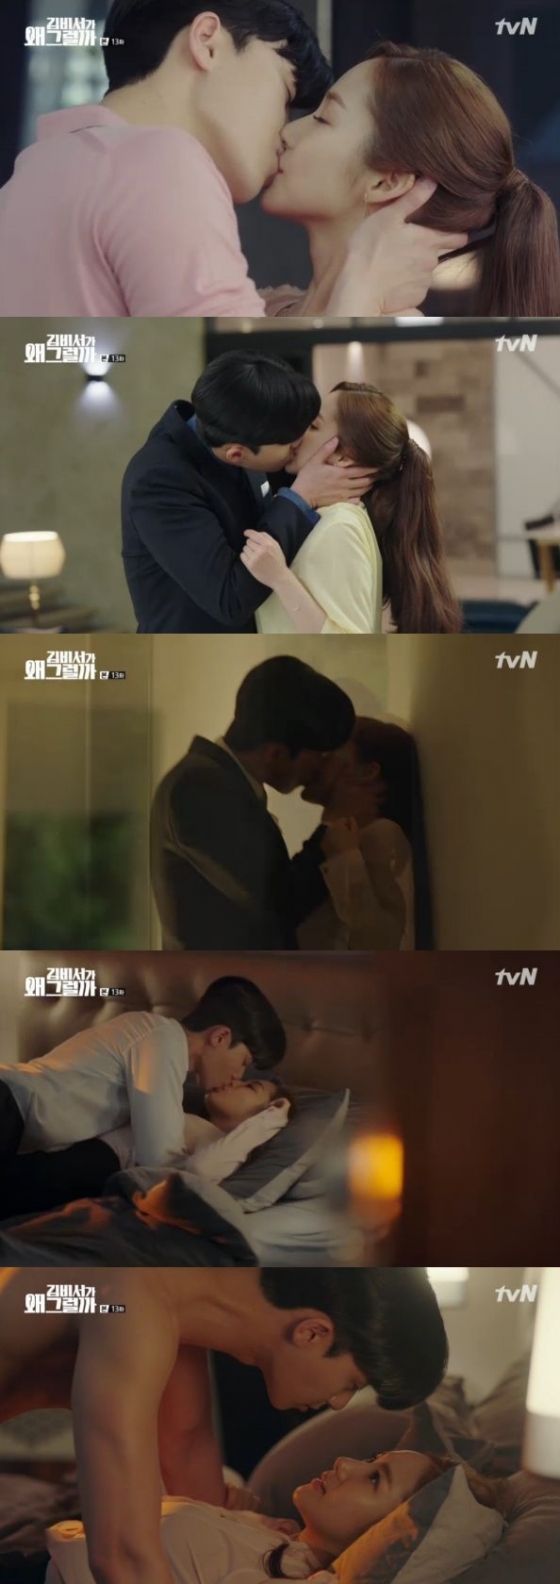 Park Seo-joon shows kissing craftsman in Why Kimbiseo?In the TVN drama Why is Kimbi Seo? (playplayed by Baek Sun-woo, Choi Bo-rim and director Park Joon-hwa), which was broadcast on the afternoon of the 18th, Kim Mi-so (Park Min-young) and Lee Youngjun (Park Seo-joon) were shown with a deep kiss.On the day of the show, Lee Youngjun hurried back to see Kim Mi-so on a business trip to Paris.As soon as he saw Kim Mi-so, he kissed, saying, I wanted to see Kimbi quickly and I did not eat and work for 12 hours.When Kim Mi-so was embarrassed, saying, What are you doing in the company? Lee Yeongjun said, I wanted to see it.After work Lee Youngjun drove with Kim Mi-so, who told Kim Mi-so, We still have work to do, thats when we cant do it.Kim Mi-so was ashamed to say something so suddenly sleazy and outspoken while leaving work, and Lee Yeongjun said, I can say it more sexy than that.A hot night, a passionate night. The hottest thing of all is to say I love you. I love you.Meanwhile Lee Yeongjun was saddened by Kim Mi-so, who doesnt know his mind.I want to be with Kimbi somehow for a minute and a second, but Kimbi is not, he said.Kim Mi-so said, I have a word that I think of when I see the vice chairman from yesterday. It is like a bulldozer to push it out of the way from yesterday.But that night, Kim Mi-so was waiting in front of Lee Yeongjuns house. Kim Mi-so said, I want to apologize for not thinking about you.And Im not going home today, he said.Lee Youngjun said, If I go to my house now, I can not control the speed today. I will never stop today.Lee Yeongjun then went into the house and kissed Kim Mi-so vigorously; he said I love you to Kim Mi-so, and Kim Mi-so also said, I love you too.Park Seo-joon has performed more than three kissing gods today (on the 18th).He kissed Park Min-young gently, wrapping his cheek, and approached intensely and kissed him vigorously.After kissing, he looked at Park Min-young with a fondness and shook the hearts of viewers. It is noteworthy what kind of kiss Park Seo-joon will shoot the woman with.